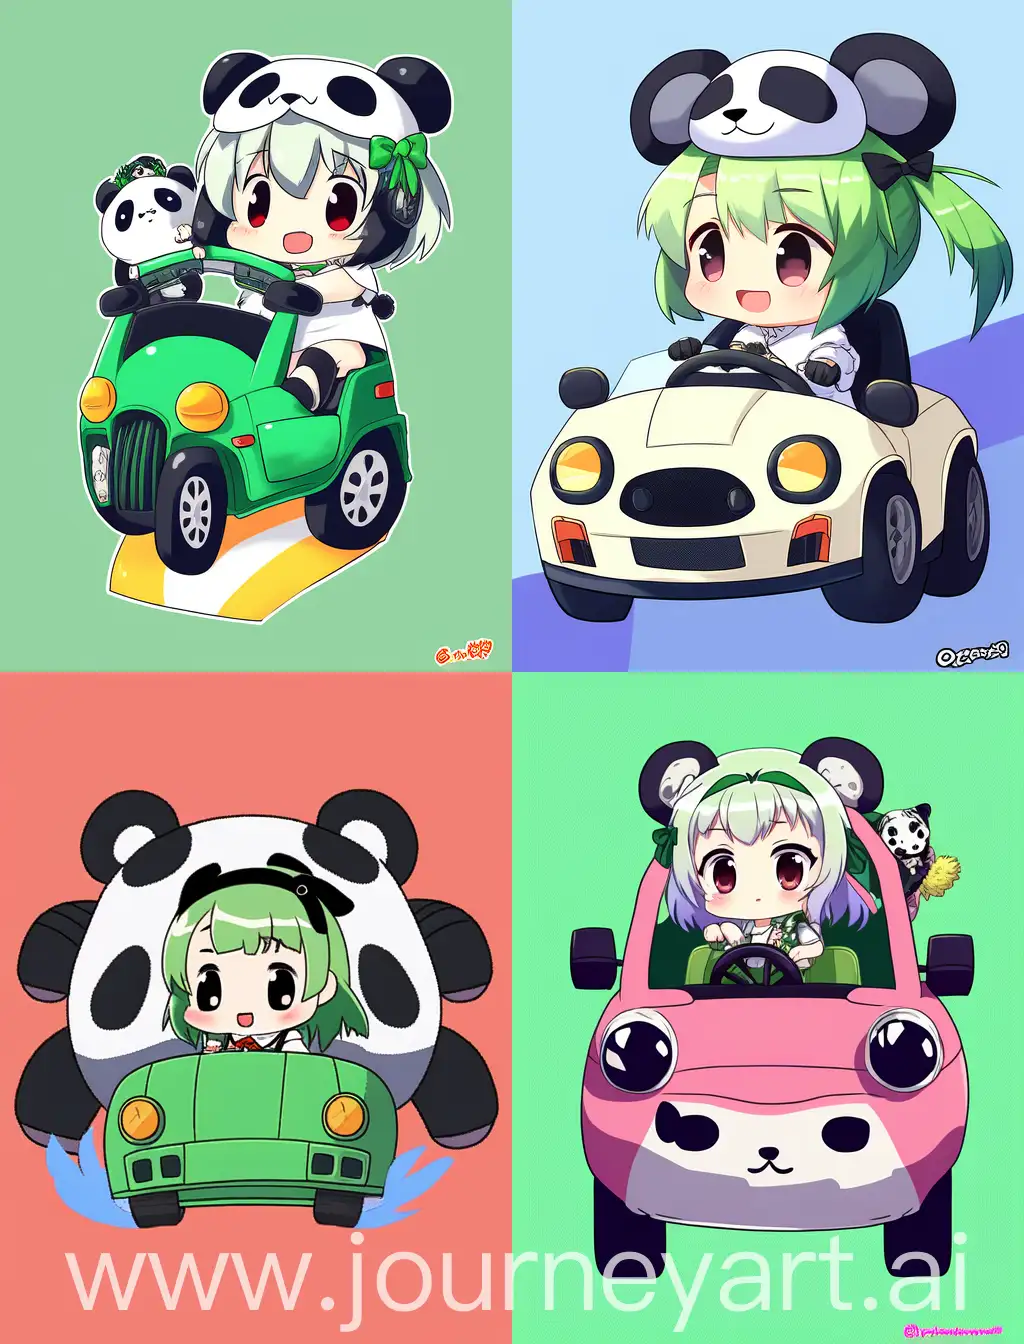 Adorable-Chibi-Girl-Driving-Car-with-Panda-on-Vibrant-Green-Background